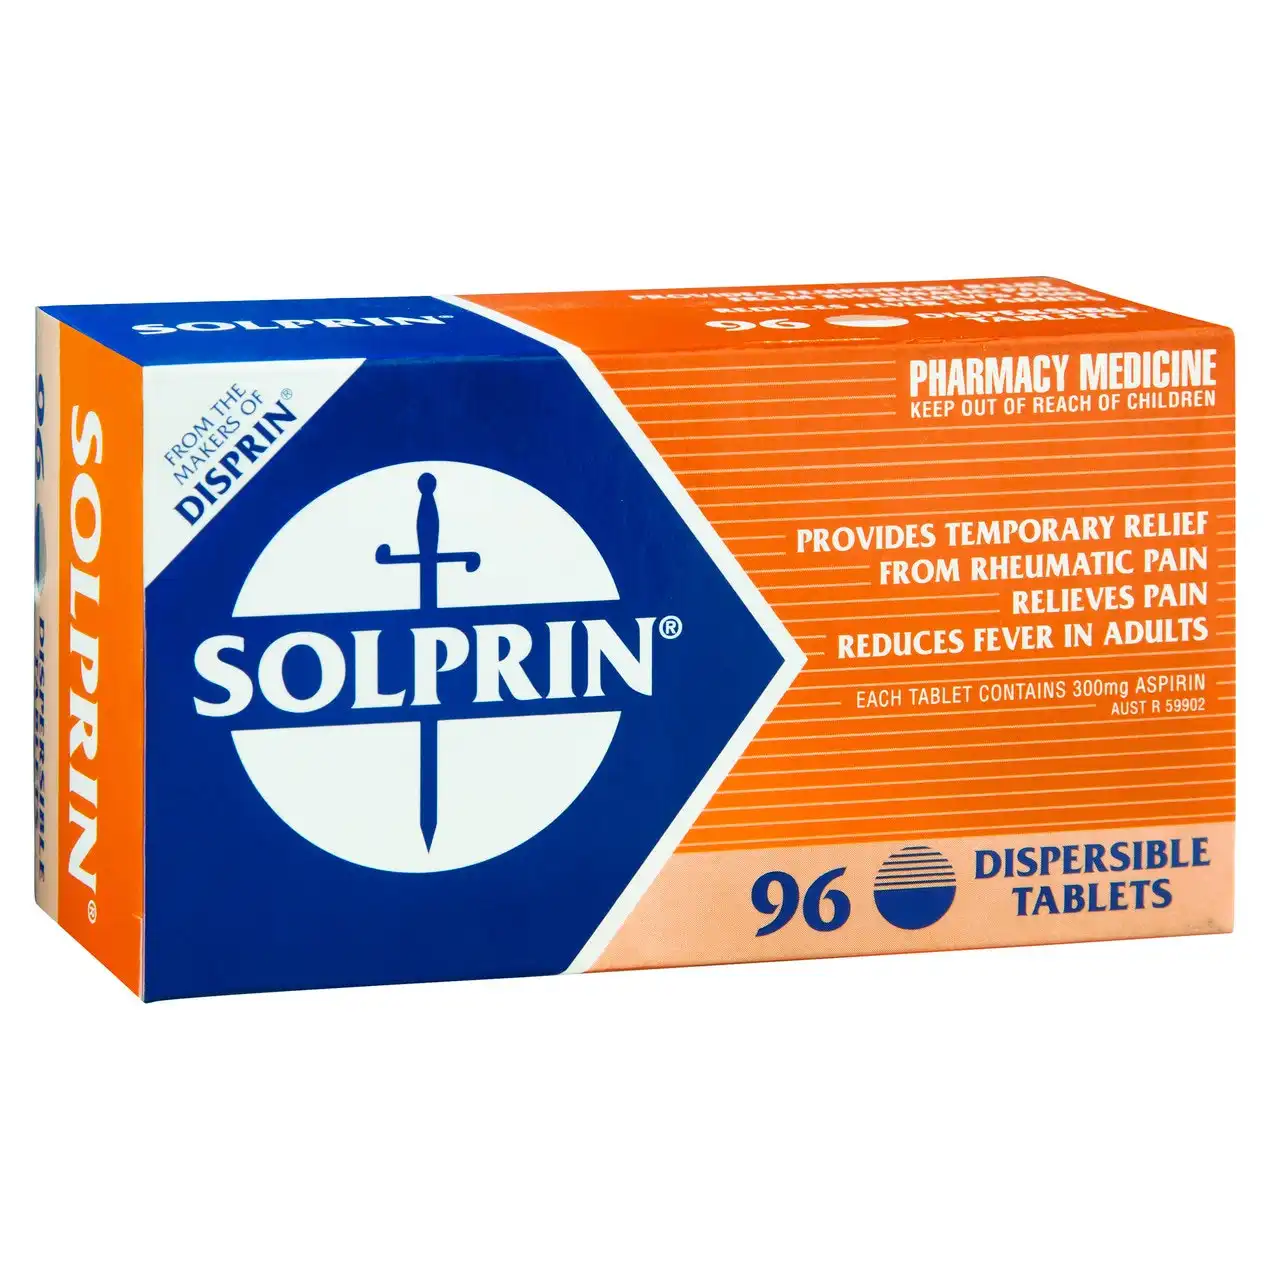 Solprin Pain and Fever Relief Dispersible Tablets 300mg Aspirin 96 pack